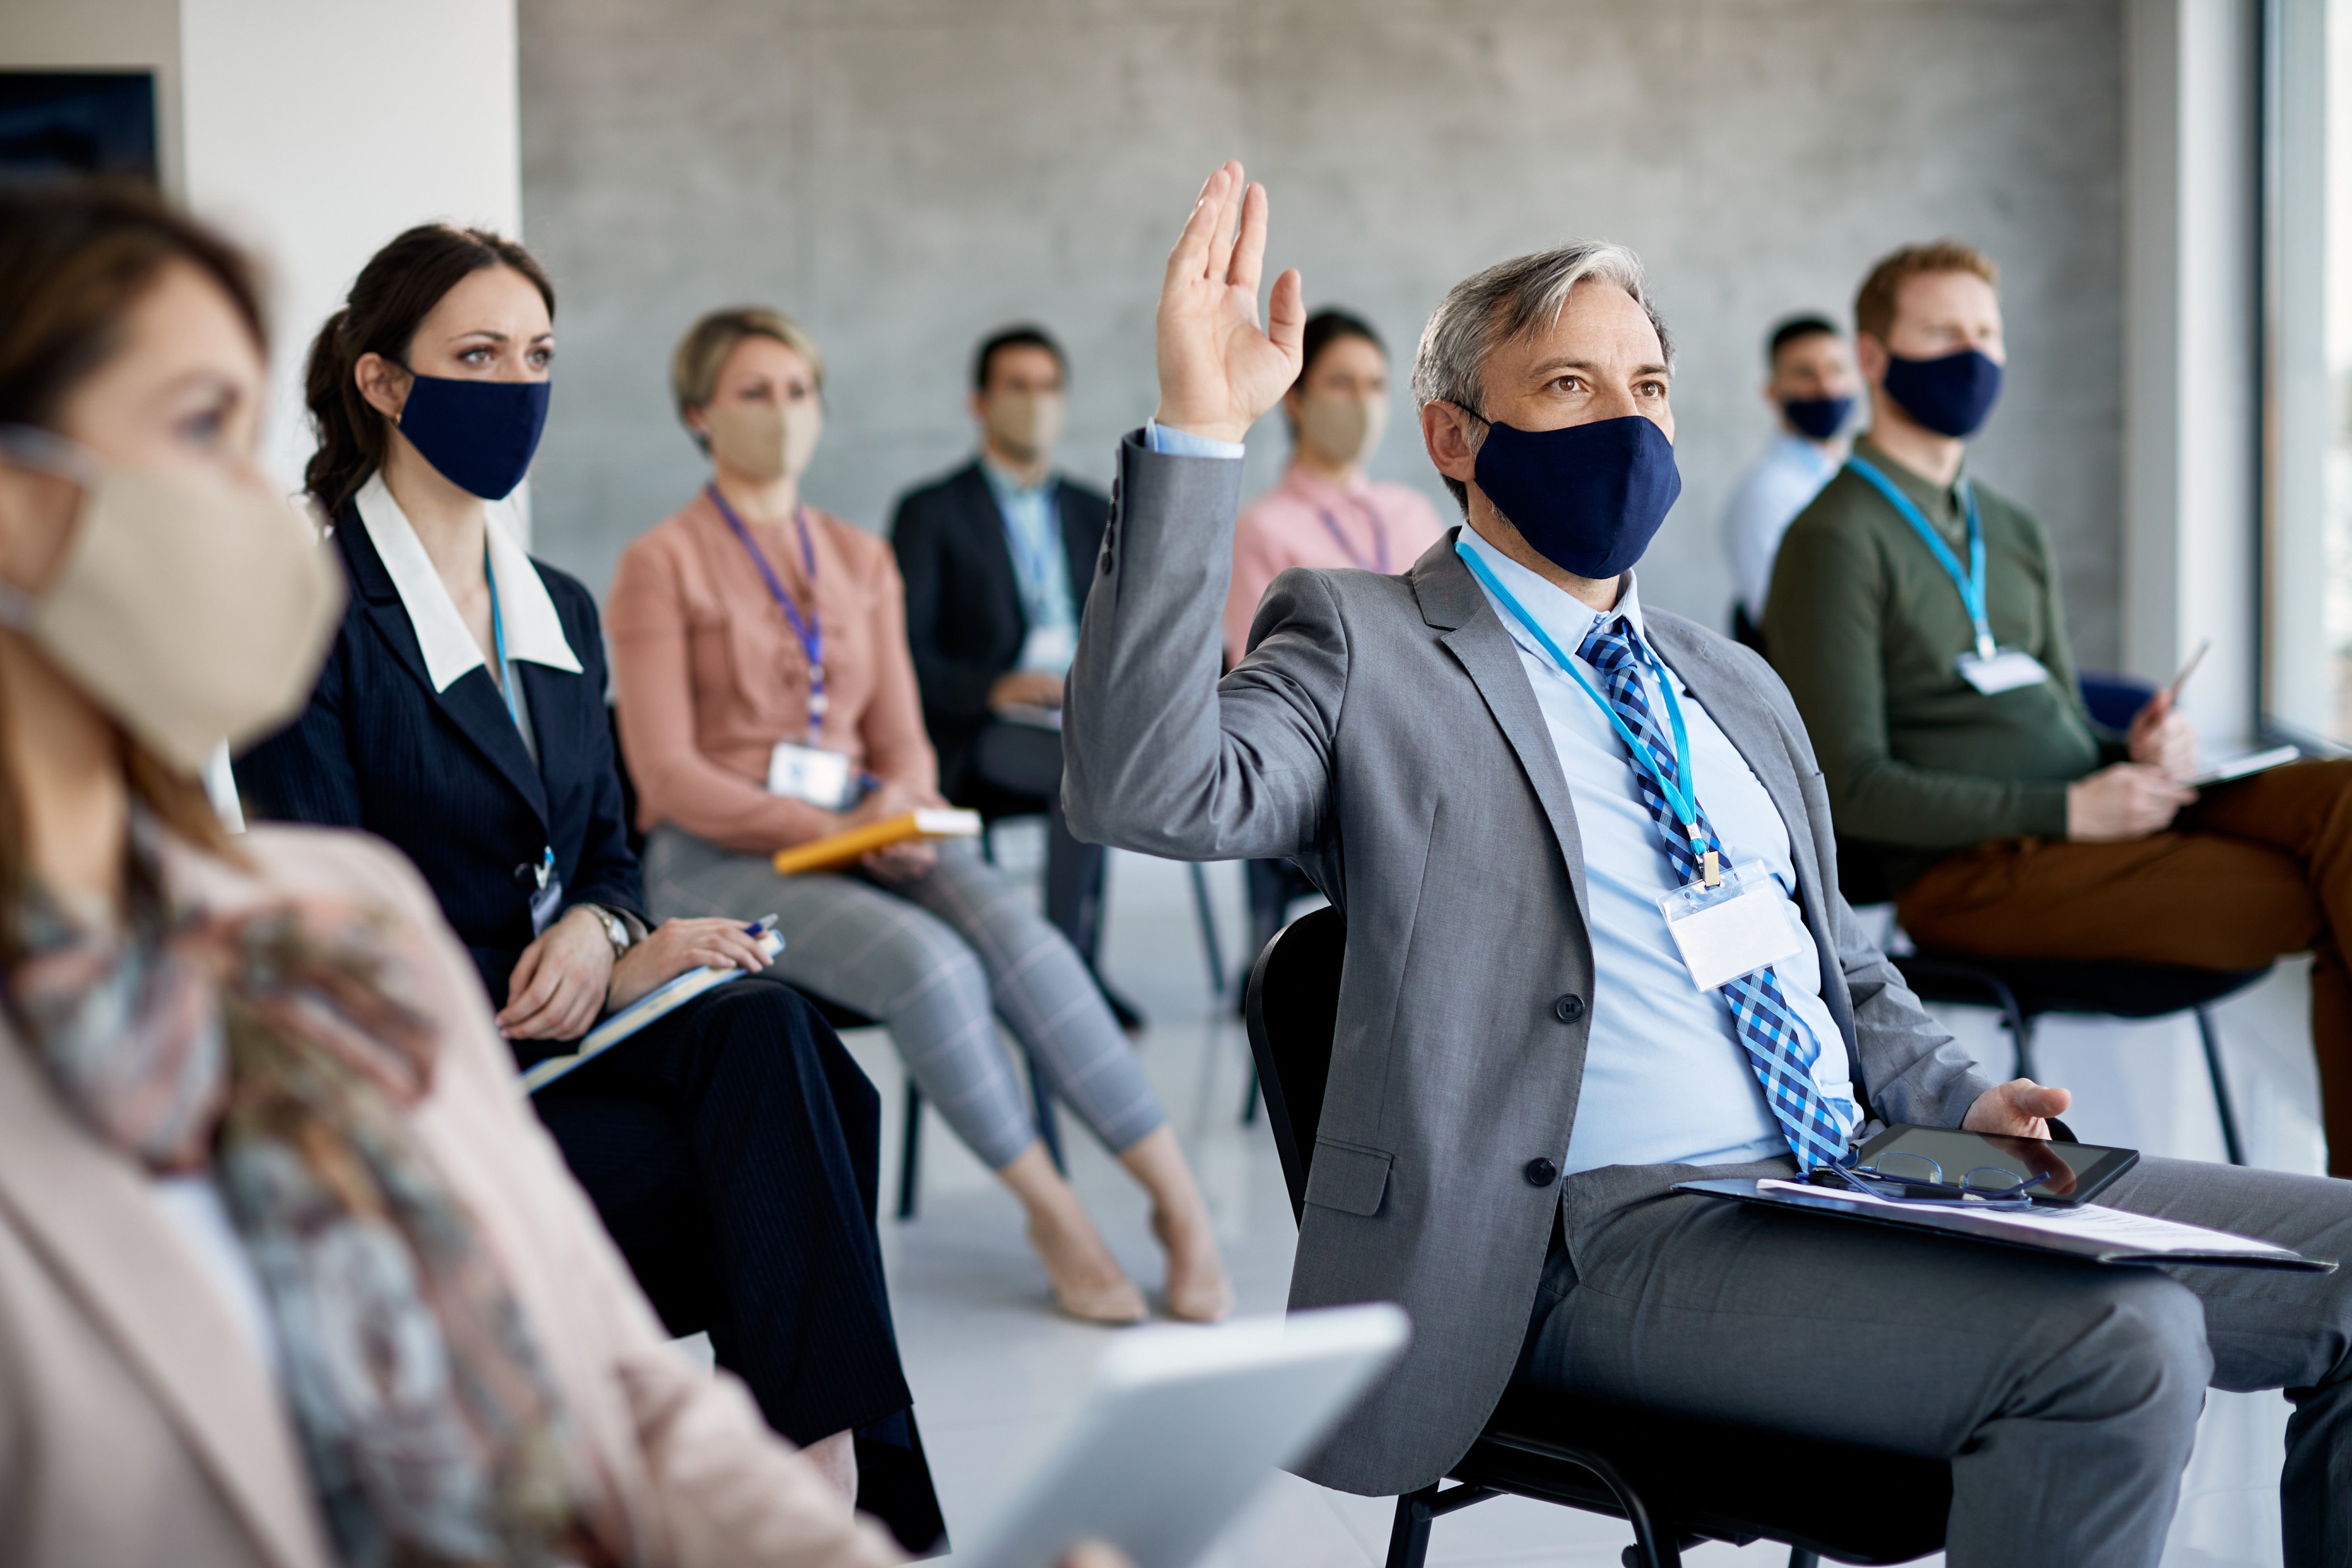 A group attend a seminar while following social distancing and mask-wearing protocols, just two of the more obvious ways the world has changed in recent times. Photo: Shutterstock